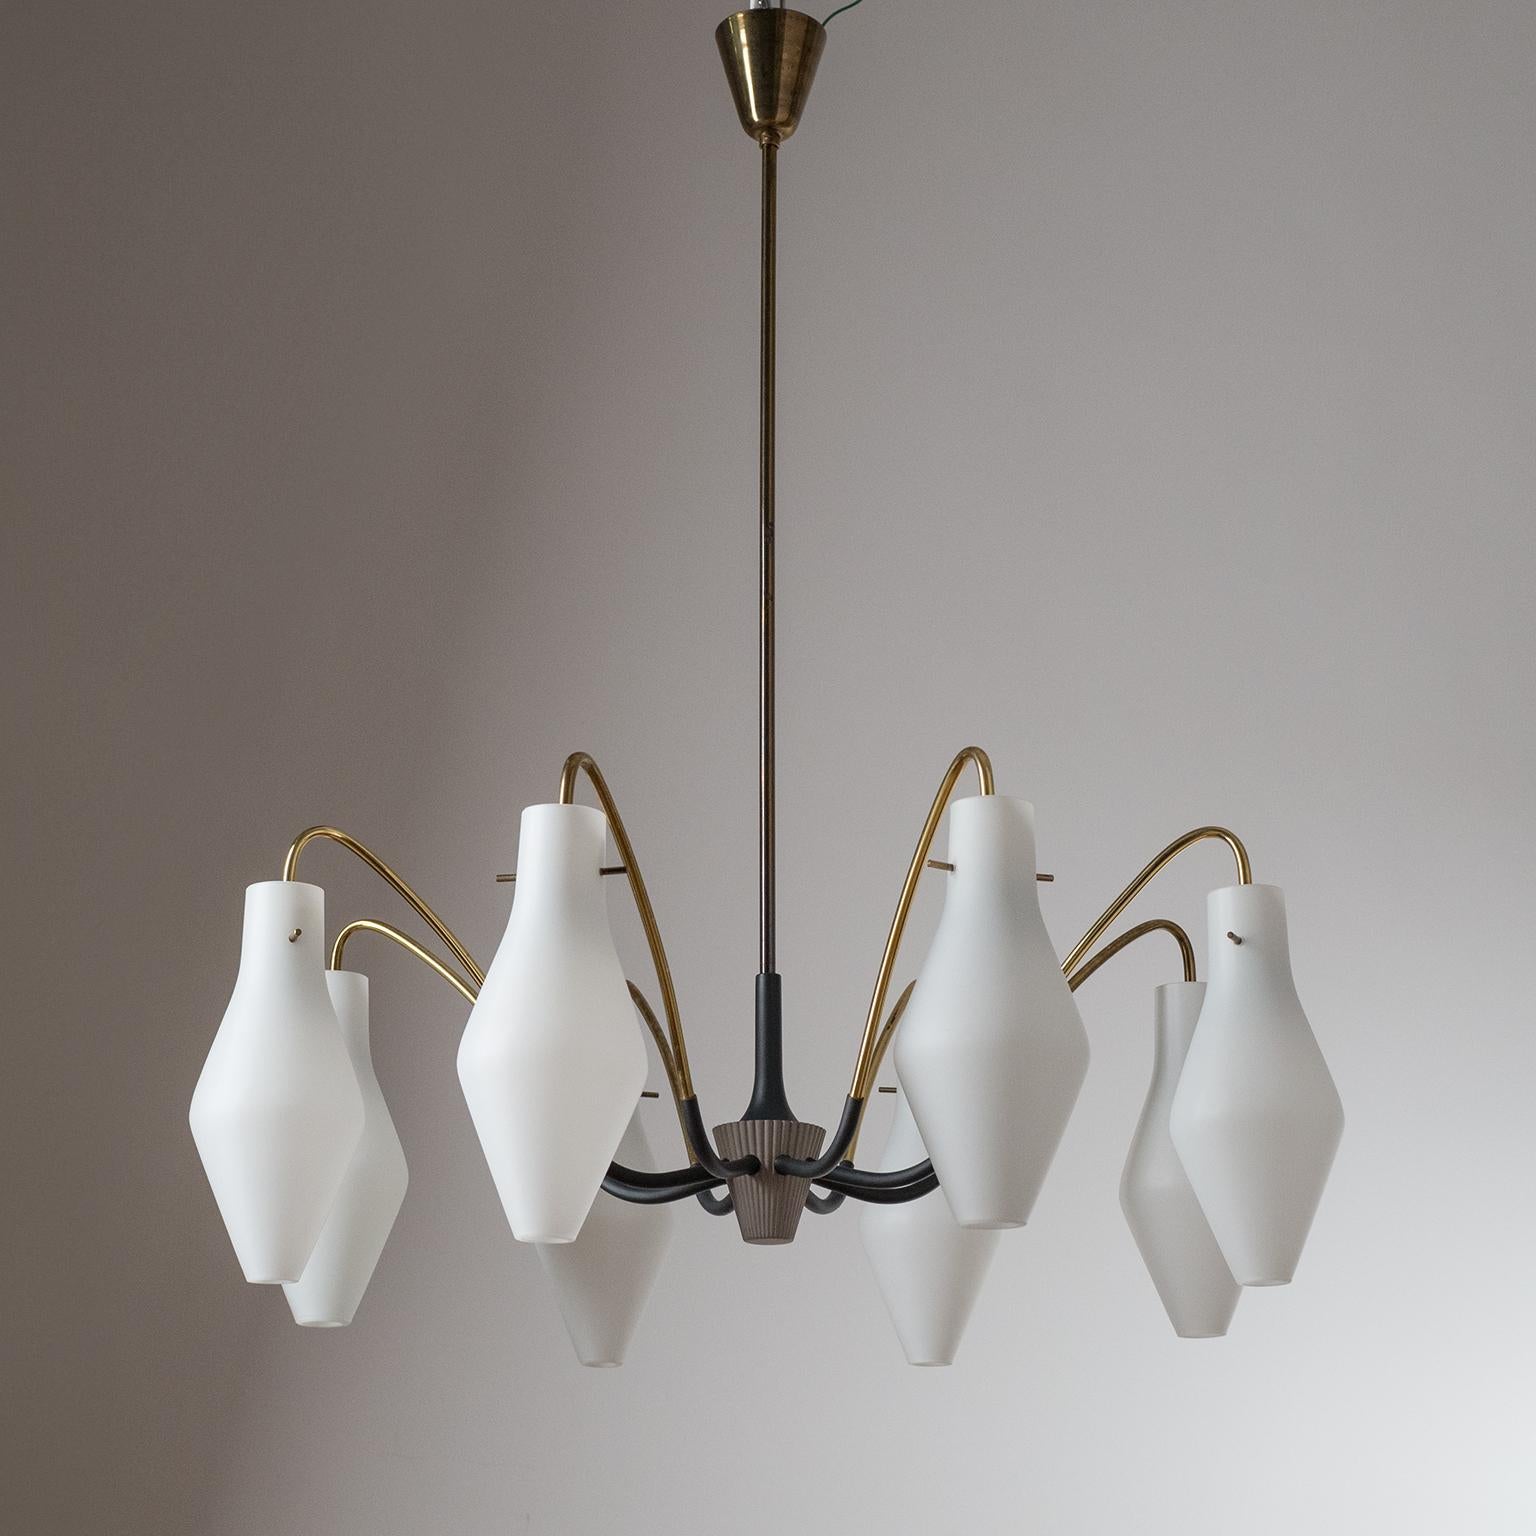 Fine mid-century 'spider' chandelier from Germany, 1950-1960s. A unique ribbed centerpiece from which eight brass arms curve out, each with a vase-shaped satin glass diffuser. Original brass E14 sockets with new wiring.